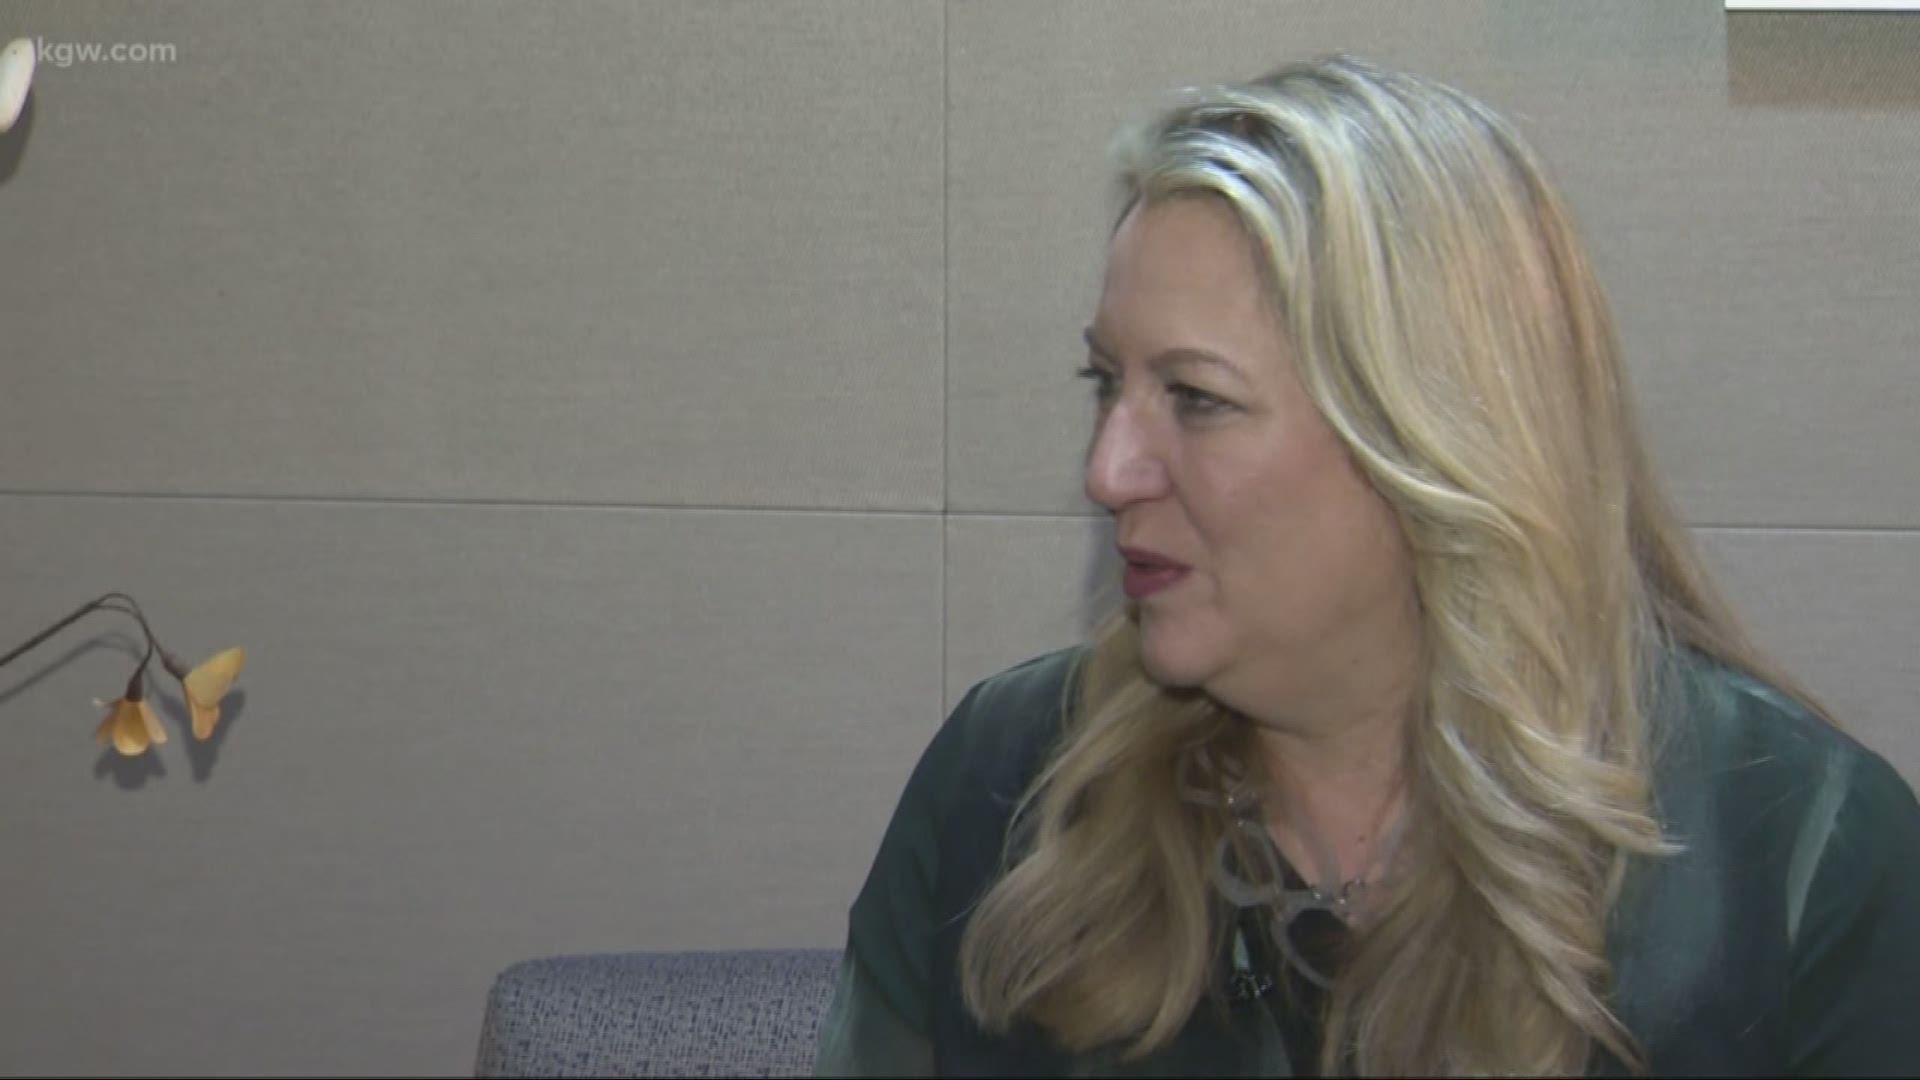 Cheryl Strayed opens up to KGW Sunrise anchor Brenda Braxton about her life.  Now in her 50s Strayed said her books would connect the eras of her life. "How did I get here from there? What sense do I make of life in middle age? I think it's such a powerful time of life."